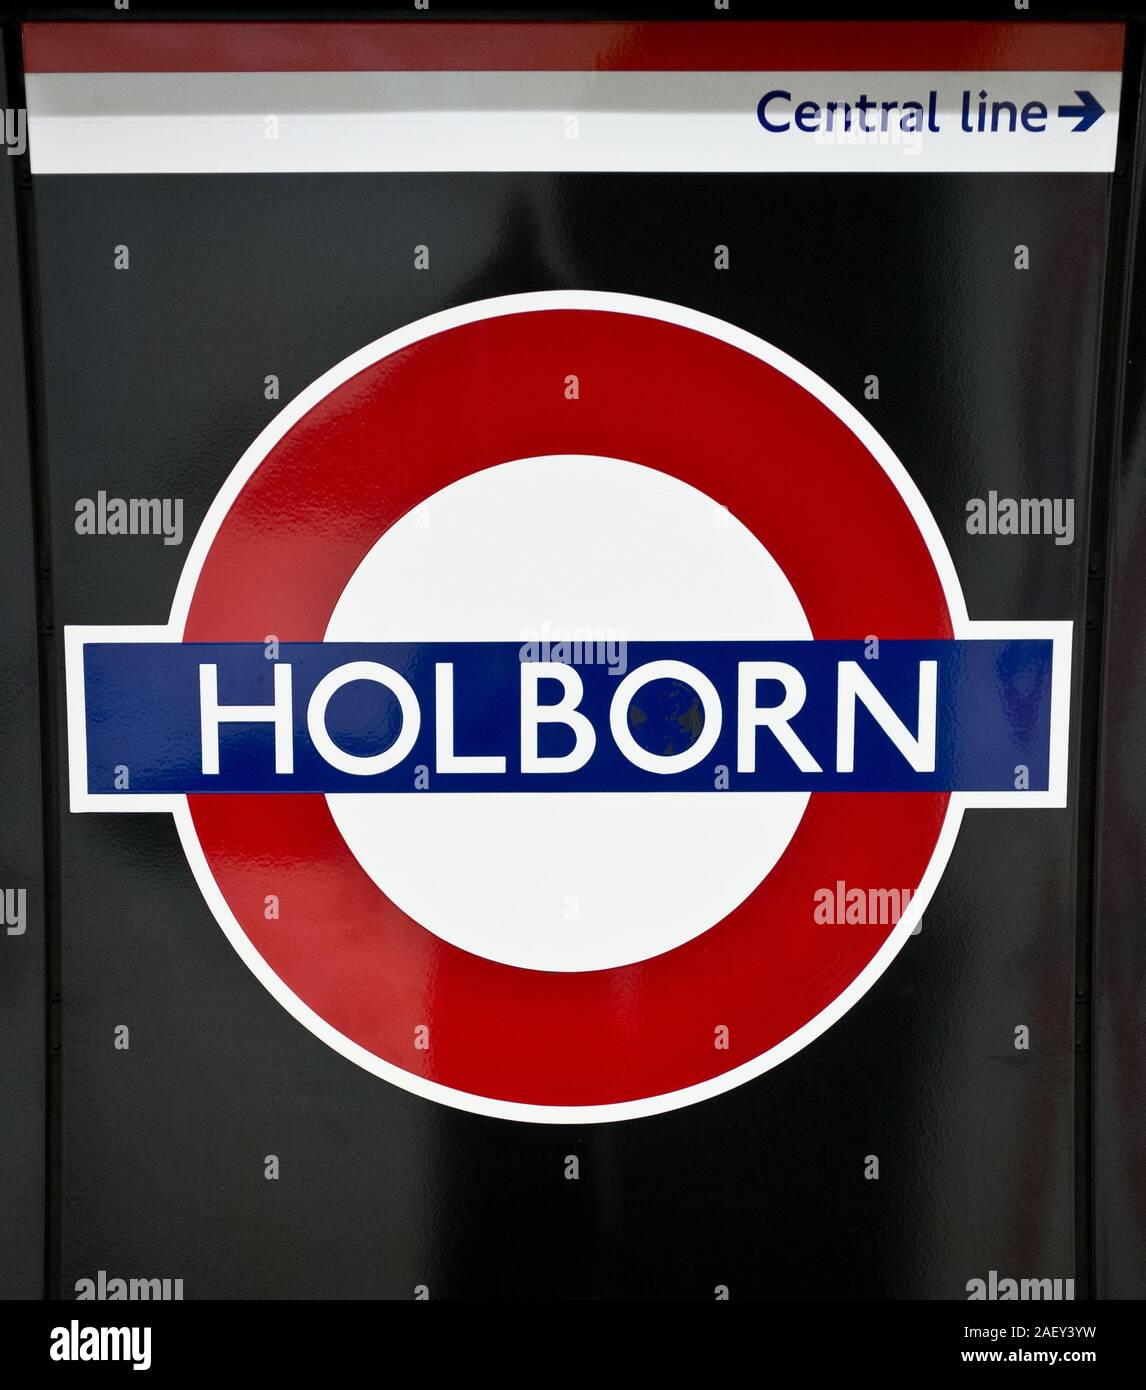 Holborn tube station. The identifying sign for the London Underground station on a platform at Holborn Station on the Piccadilly Line. Stock Photo